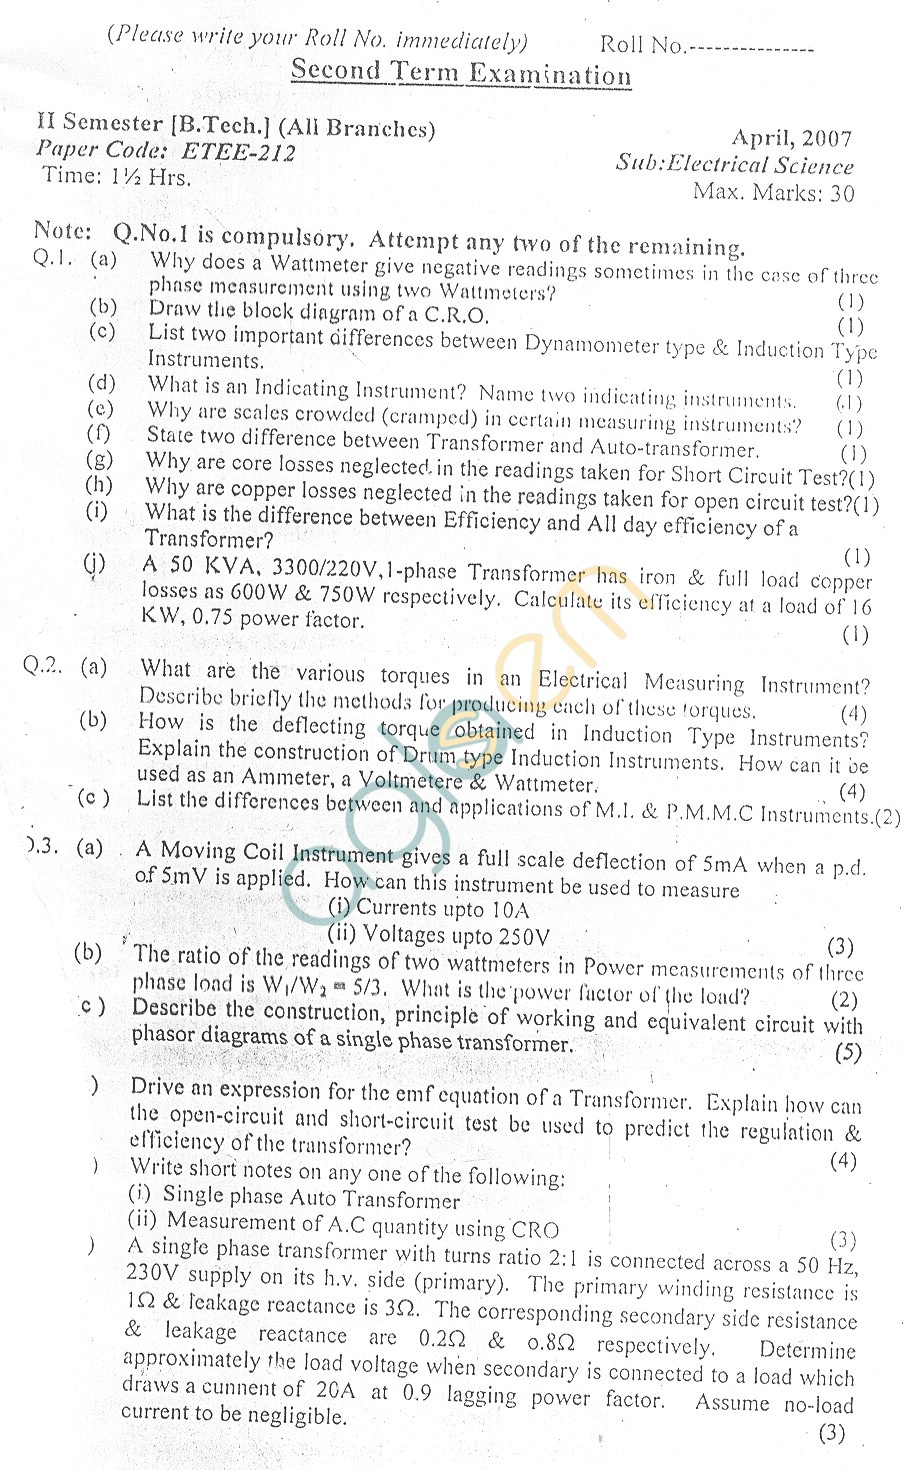 GGSIPU Question Papers Second Semester – Second Term 2007 – ETEE-212